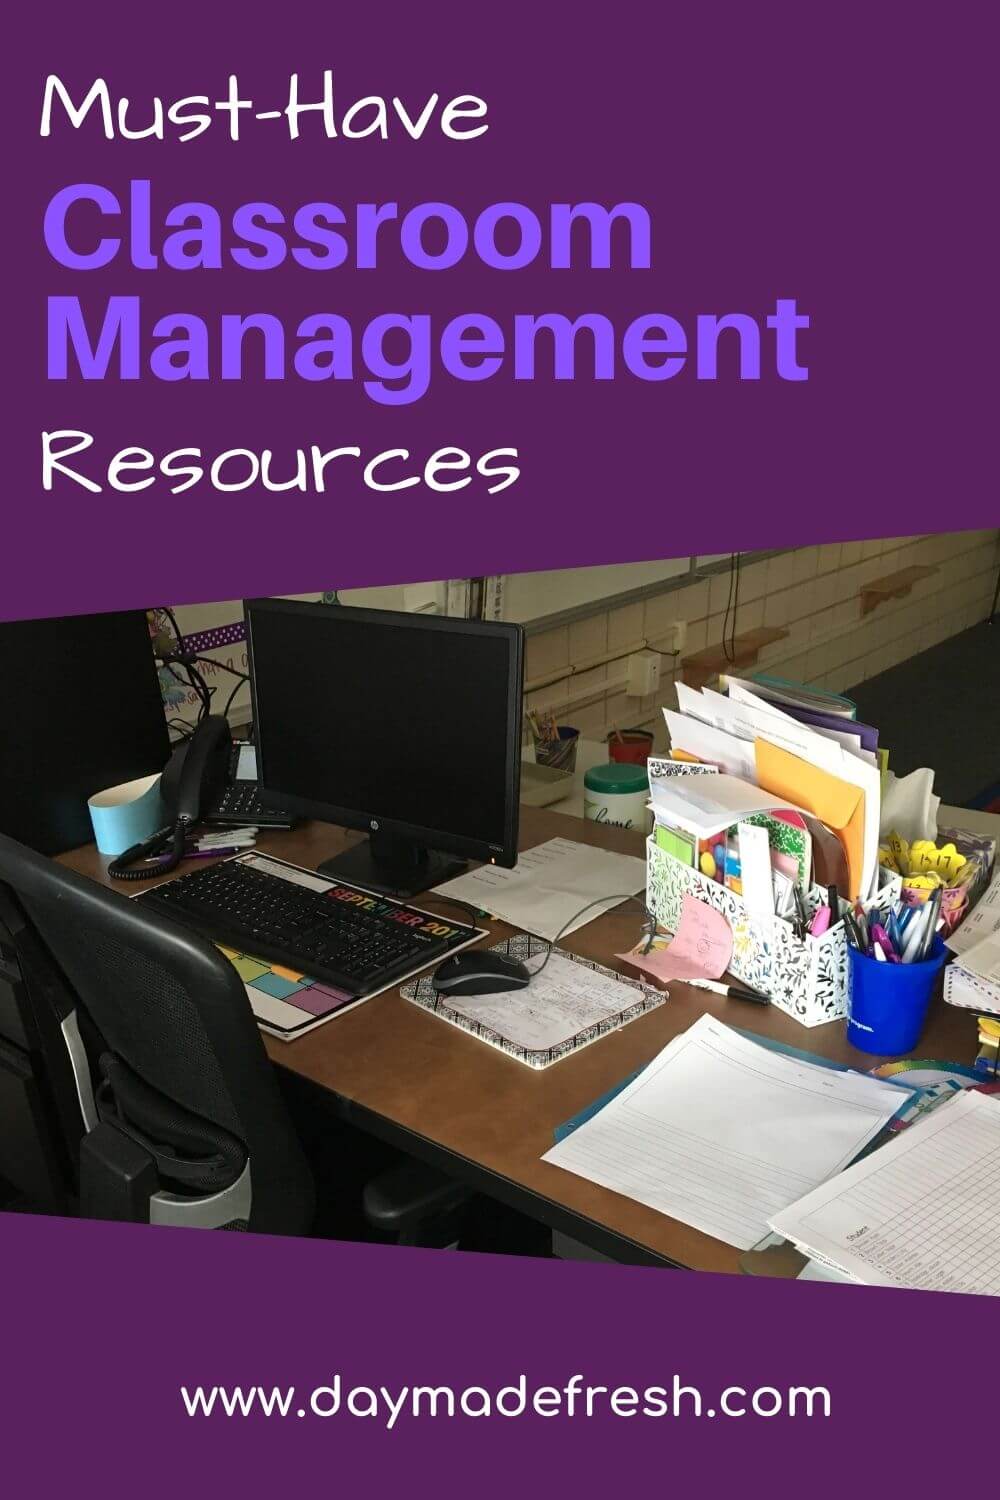 Image Text: Must-Have Classroom Management Resources Image: Elementary Teacher Desk